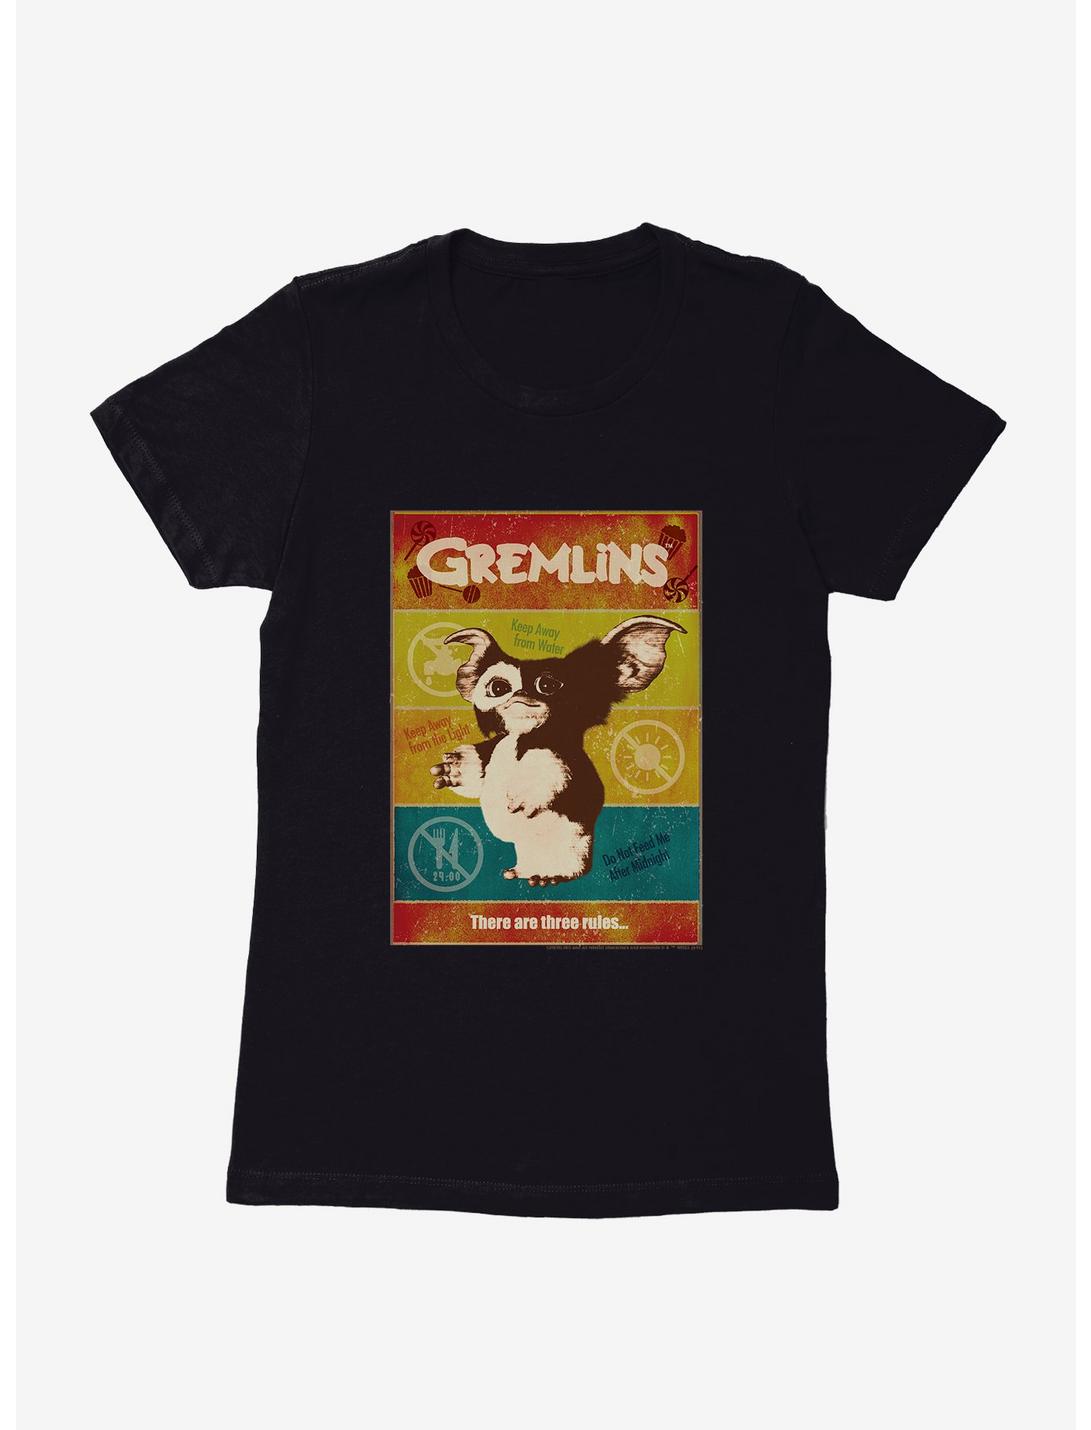 Gremlins There Are Three Rules Womens T-Shirt, BLACK, hi-res